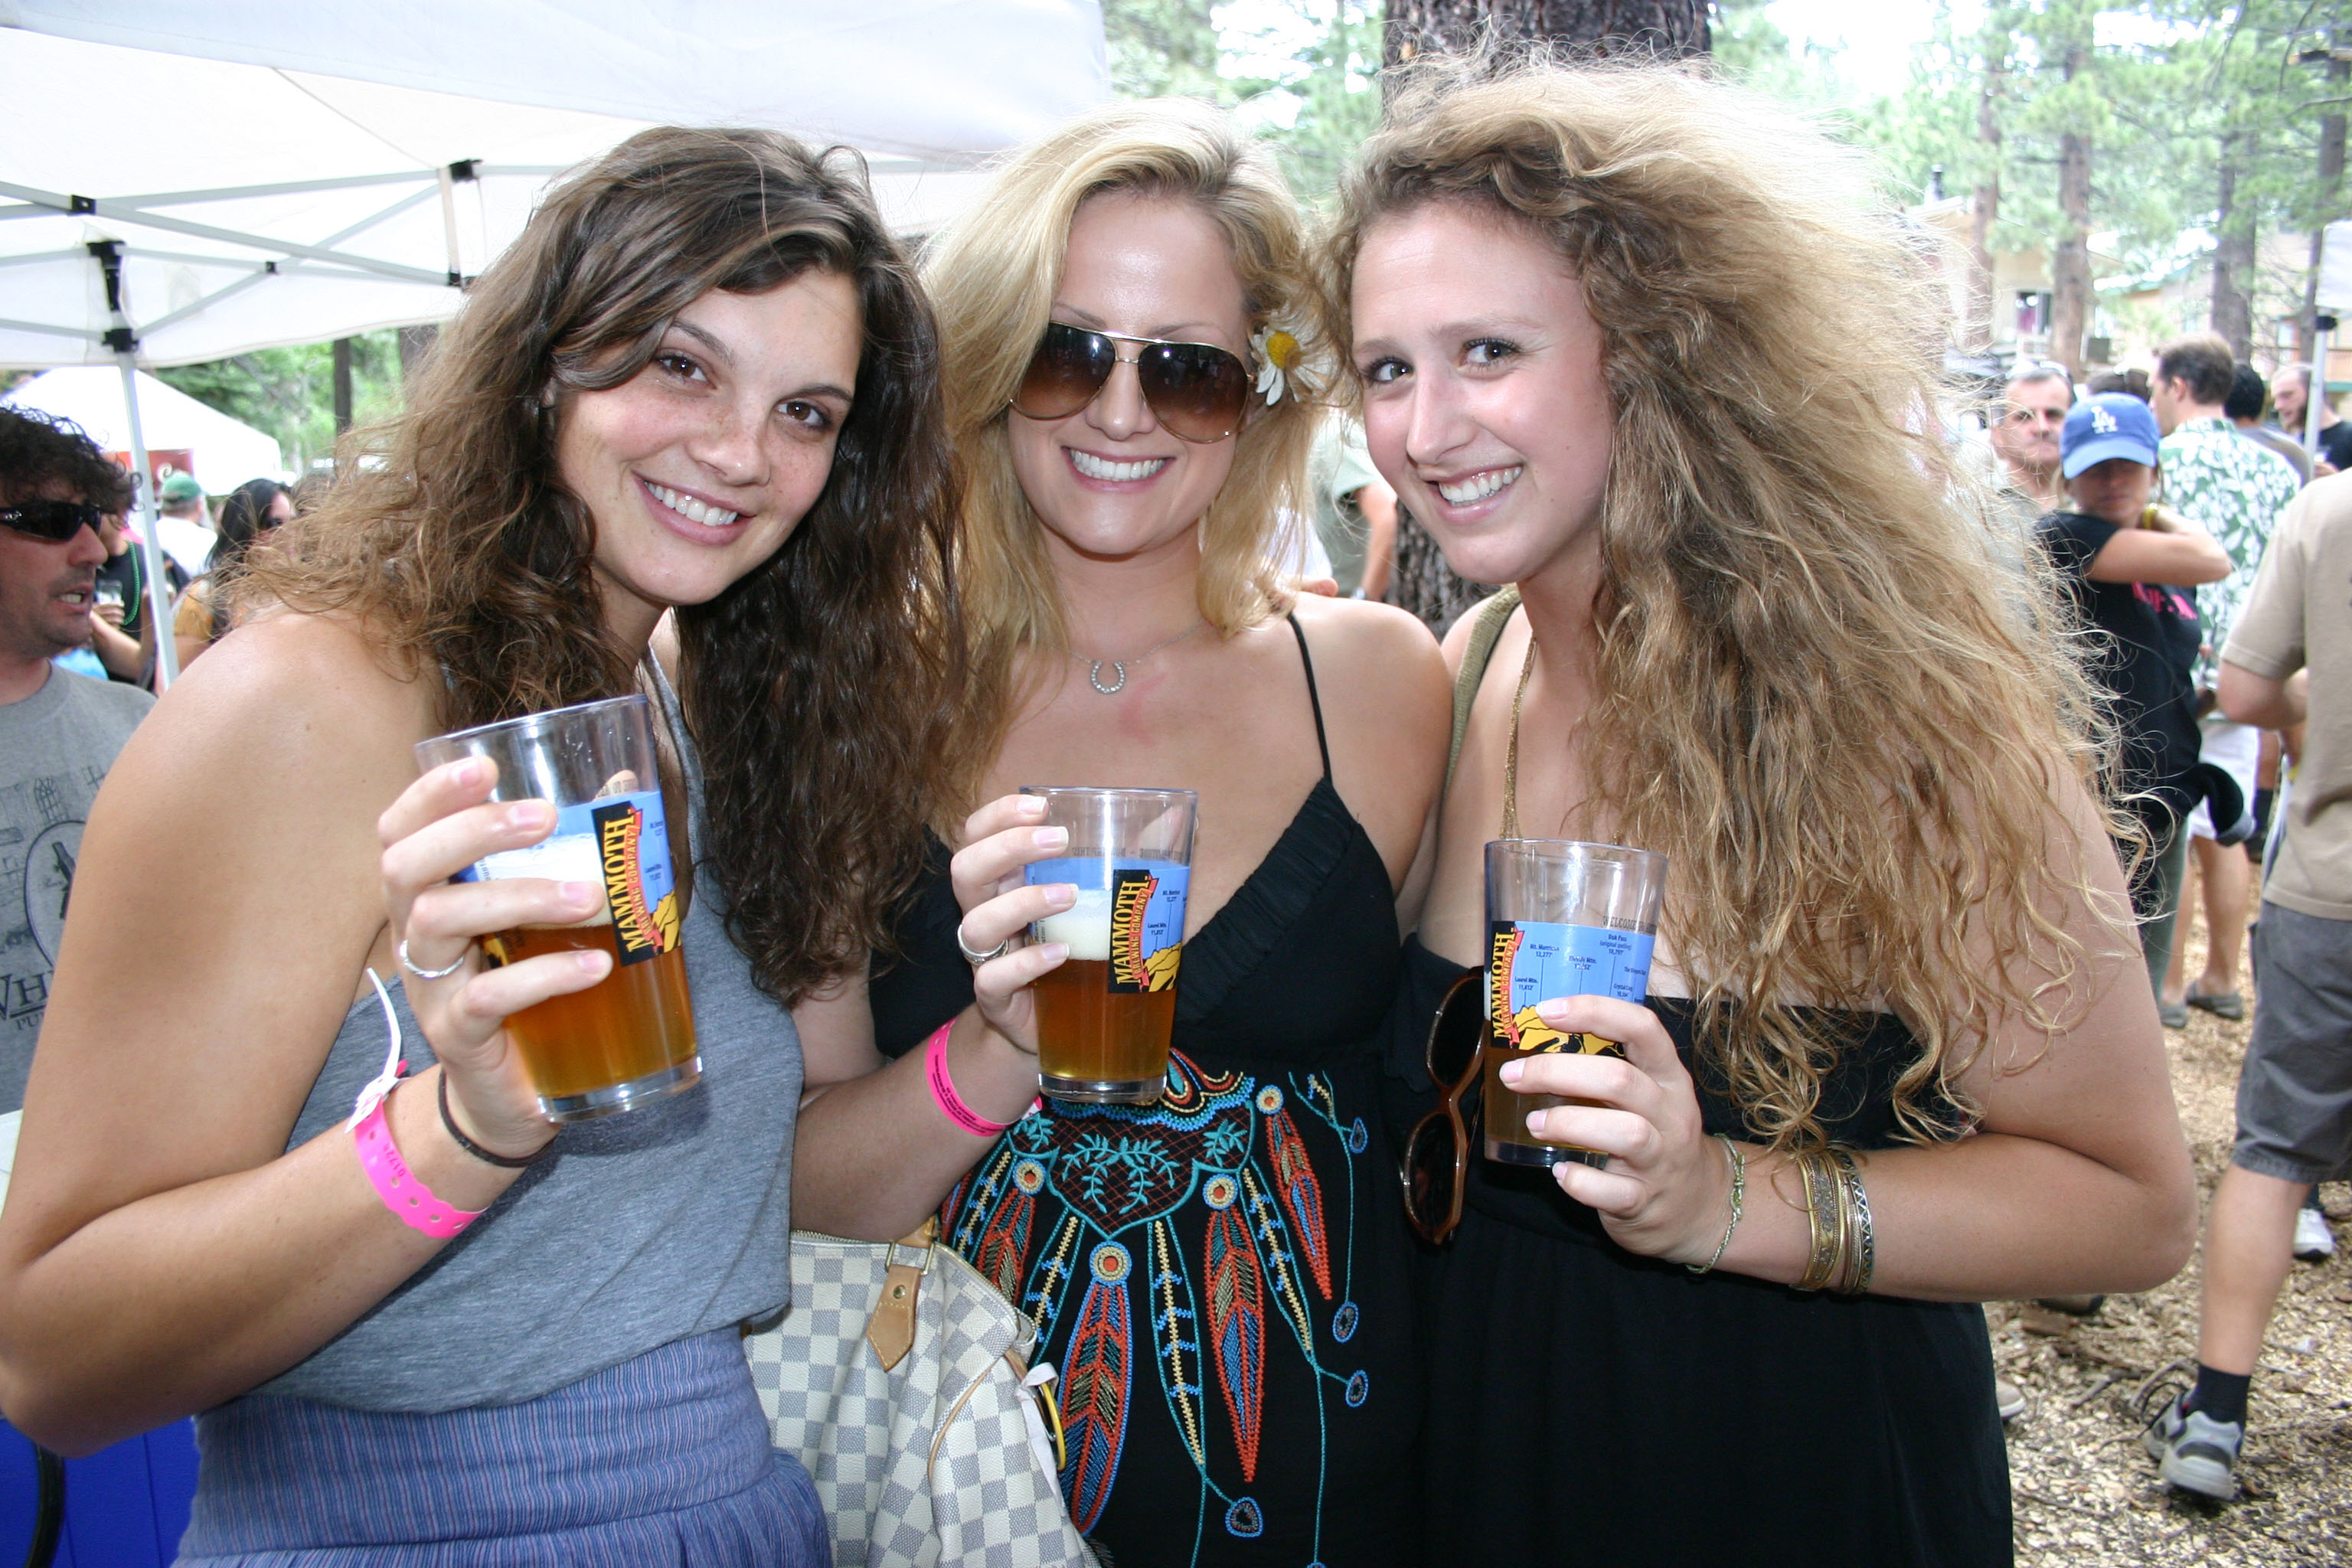 Visitors to the 22nd Annual Mammoth Festival of Beers & Bluespalooza can taste from over 90 craft breweries featuring over 200 craft beers from across the country.